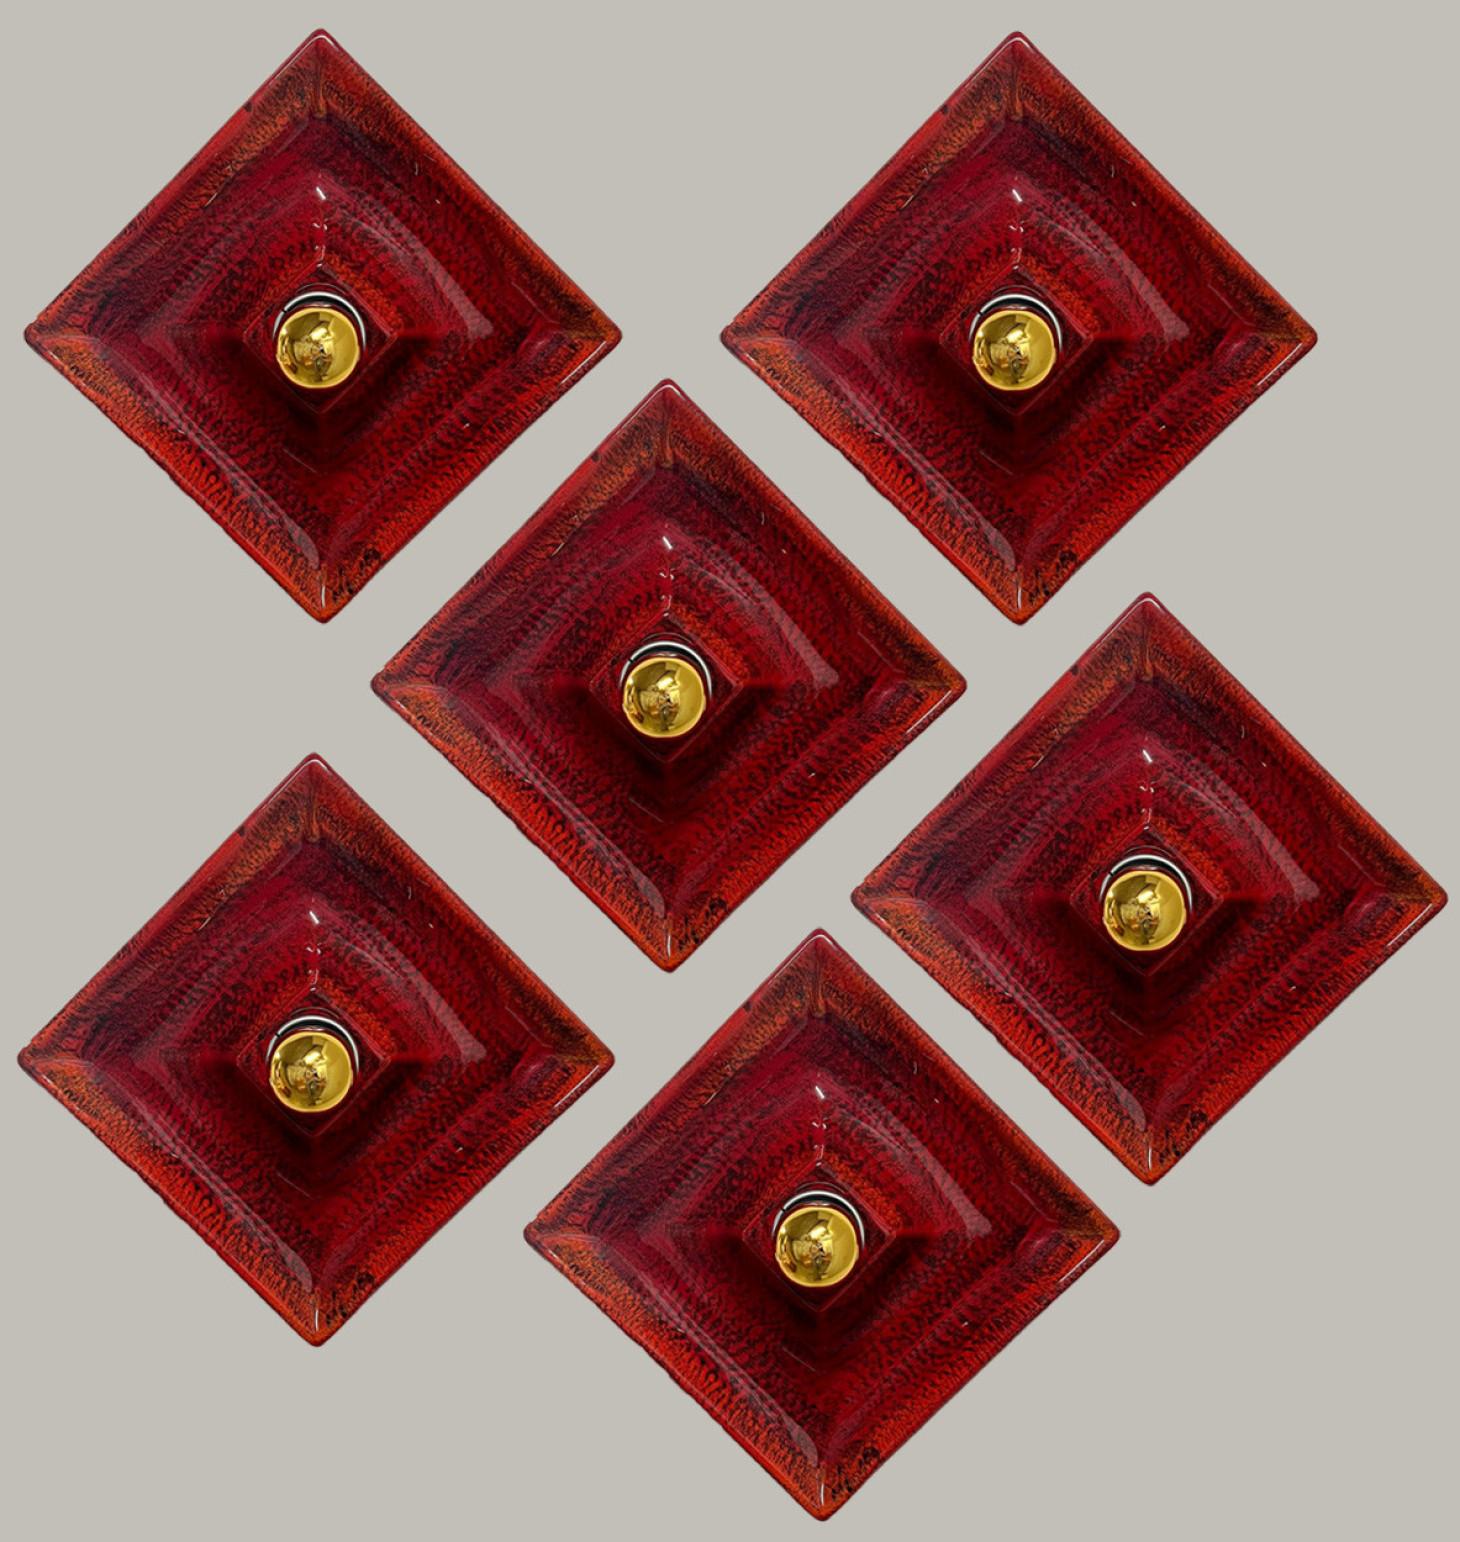 Red Square Ceramic Wall Lights by Hustadt Keramik, Germany, 1970 For Sale 2